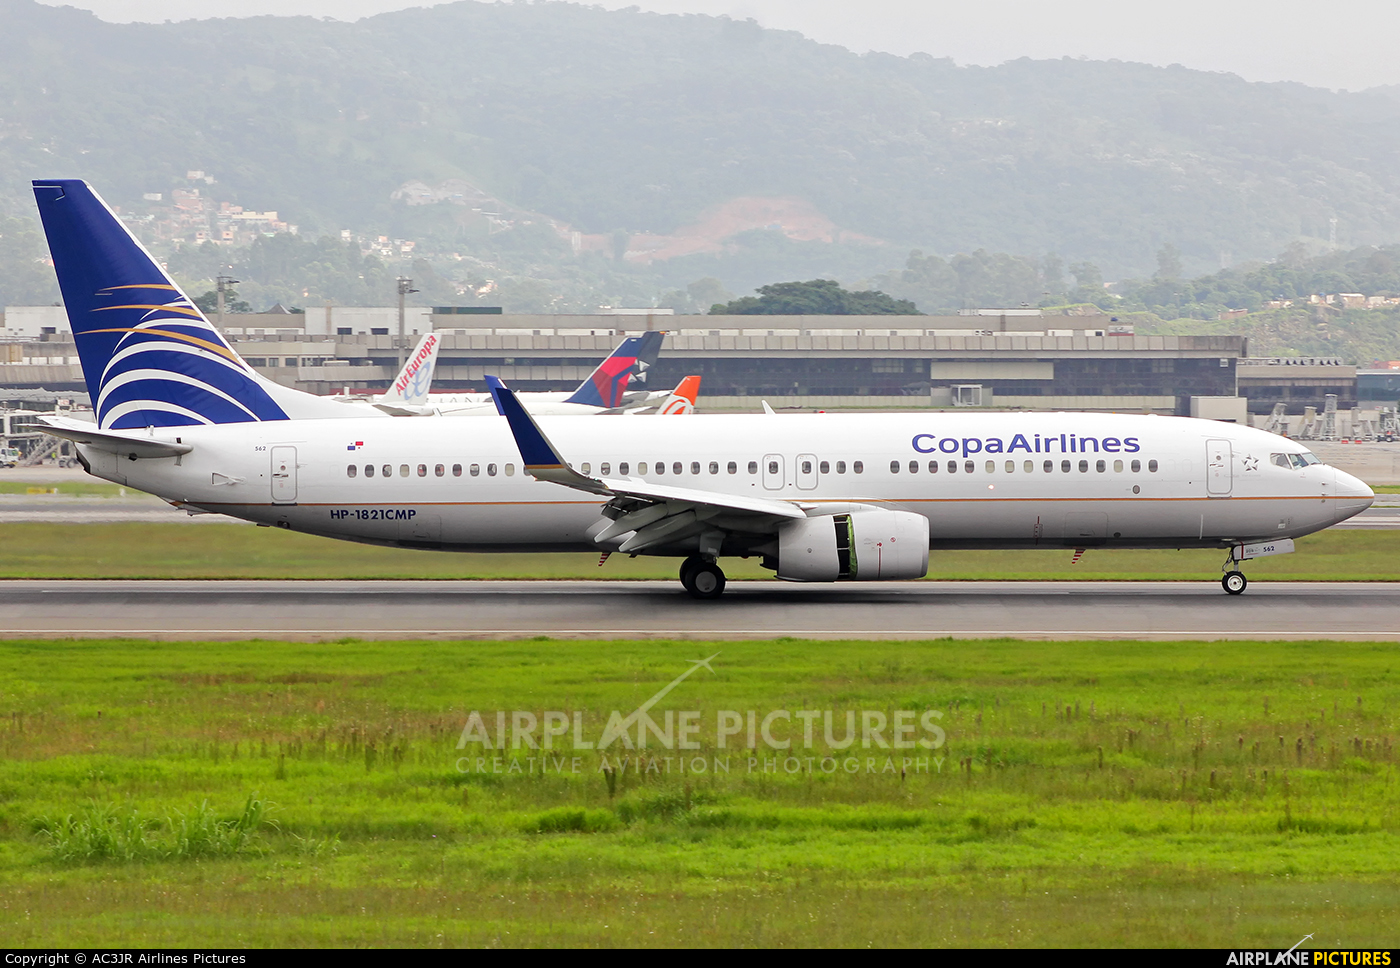 Copa Airlines HP-1821CMP aircraft at São Paulo - Guarulhos